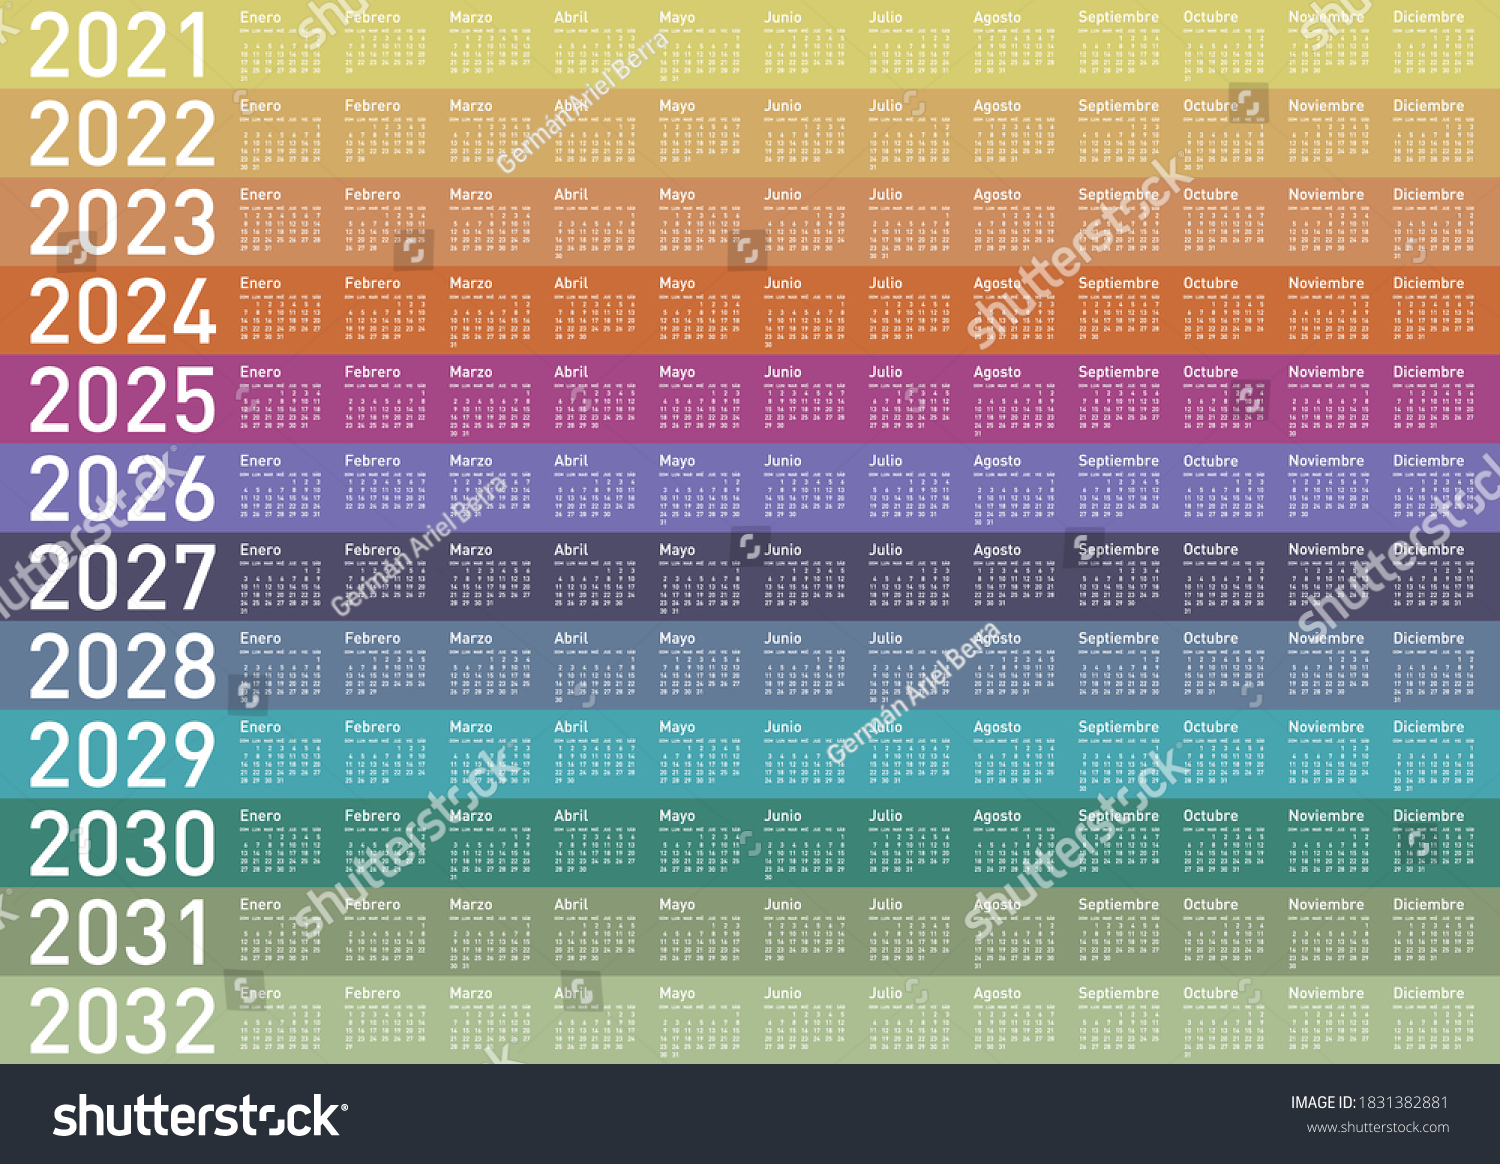 Colorful Calendar for Years 2021, 2022, 2023, - Royalty Free Stock ...